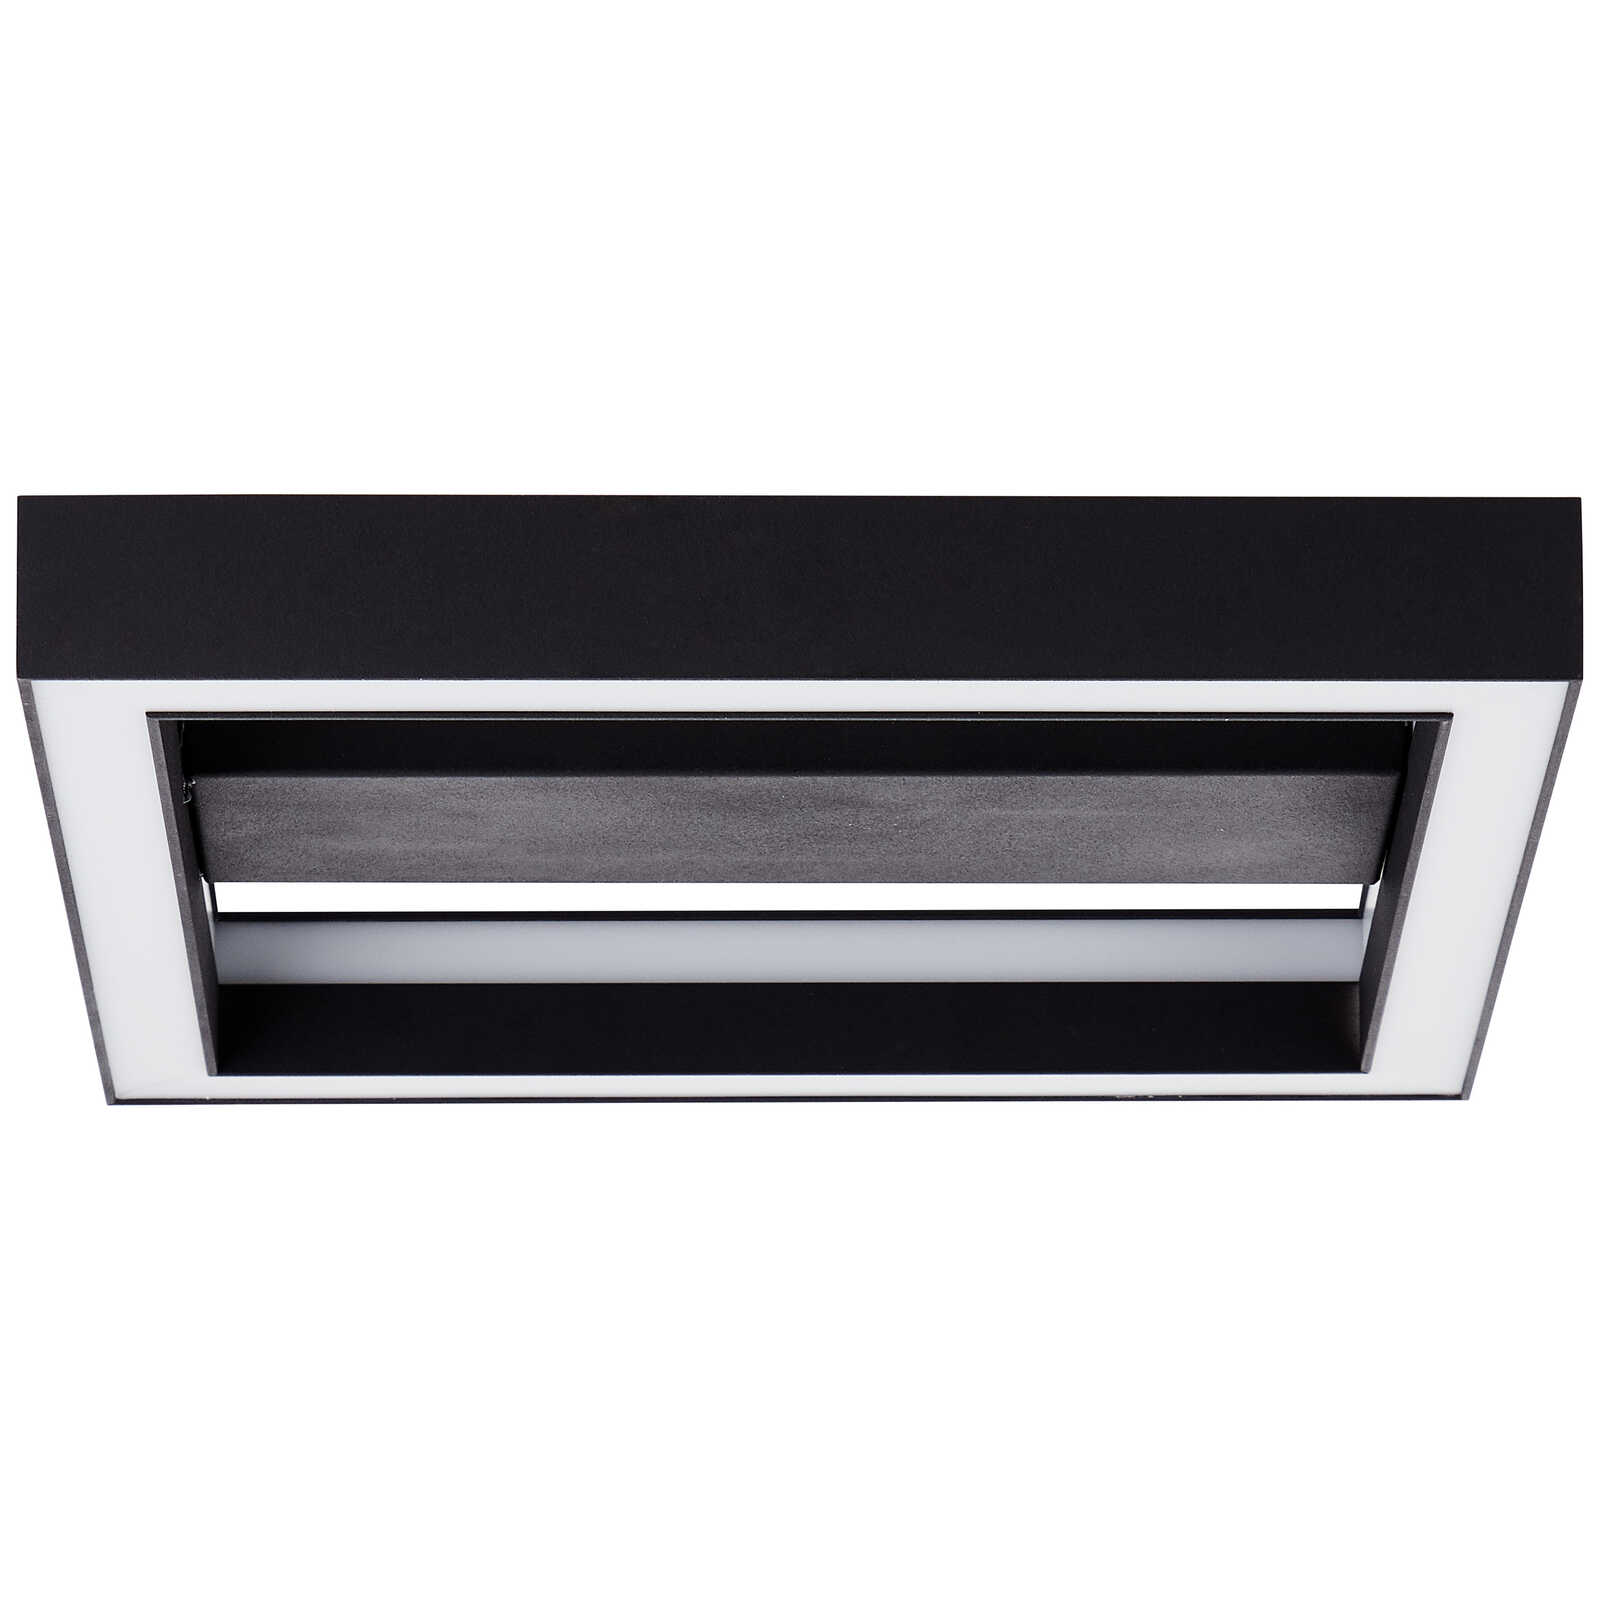             Plastic wall and ceiling light - Janis 2 - Black
        